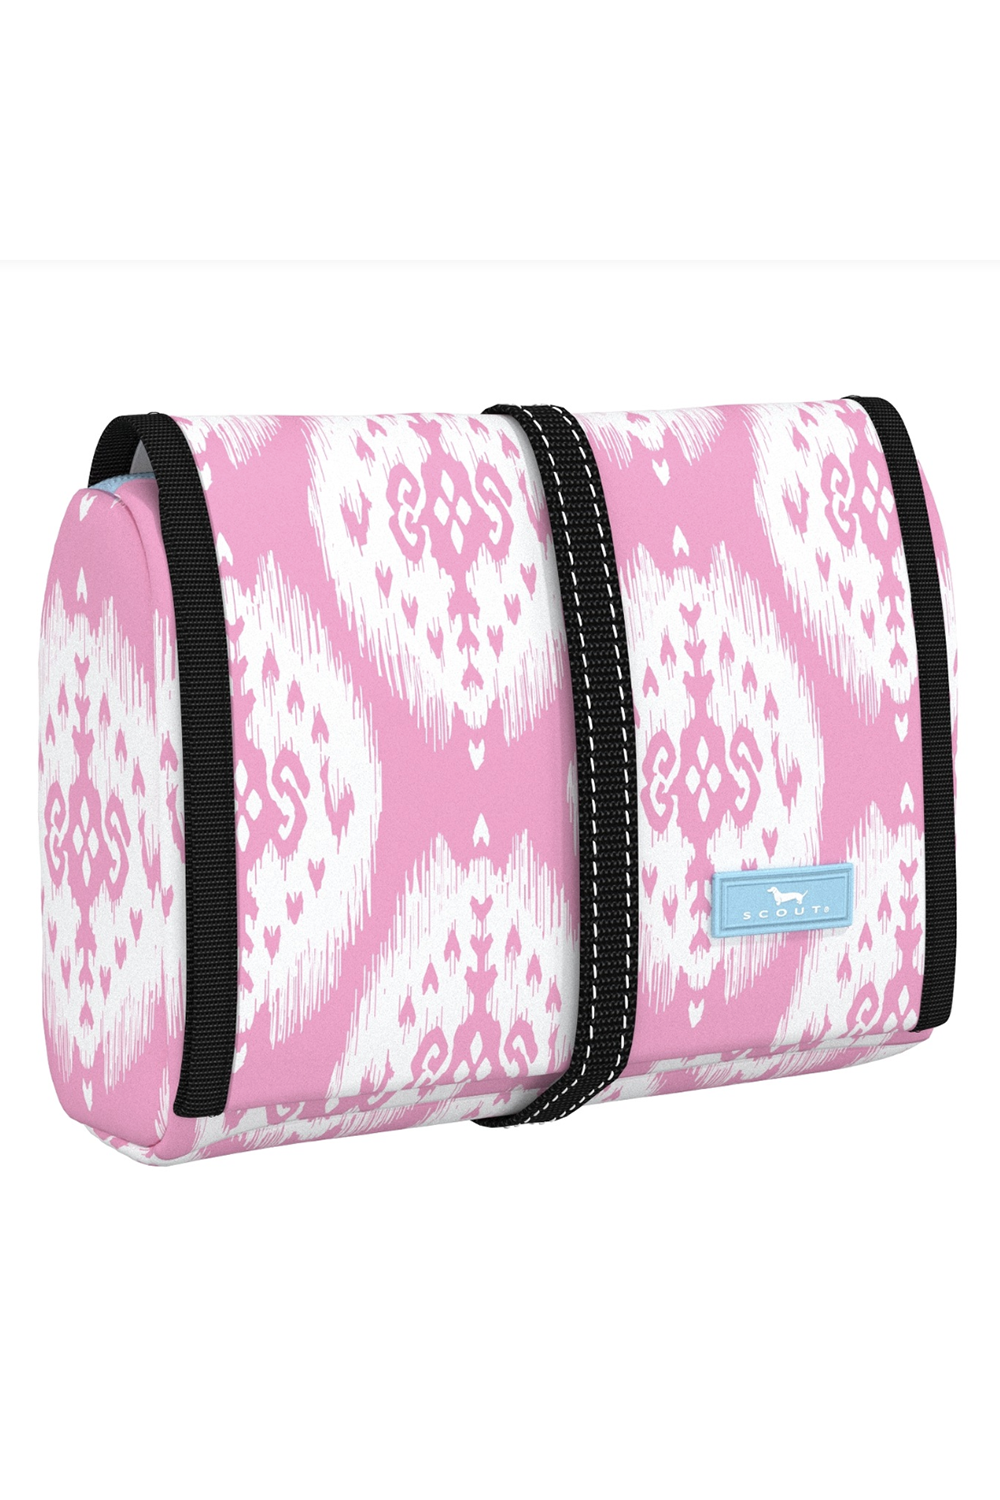 Beauty Burrito Roller Cosmetic Case - "Ikant Belize" SUM24